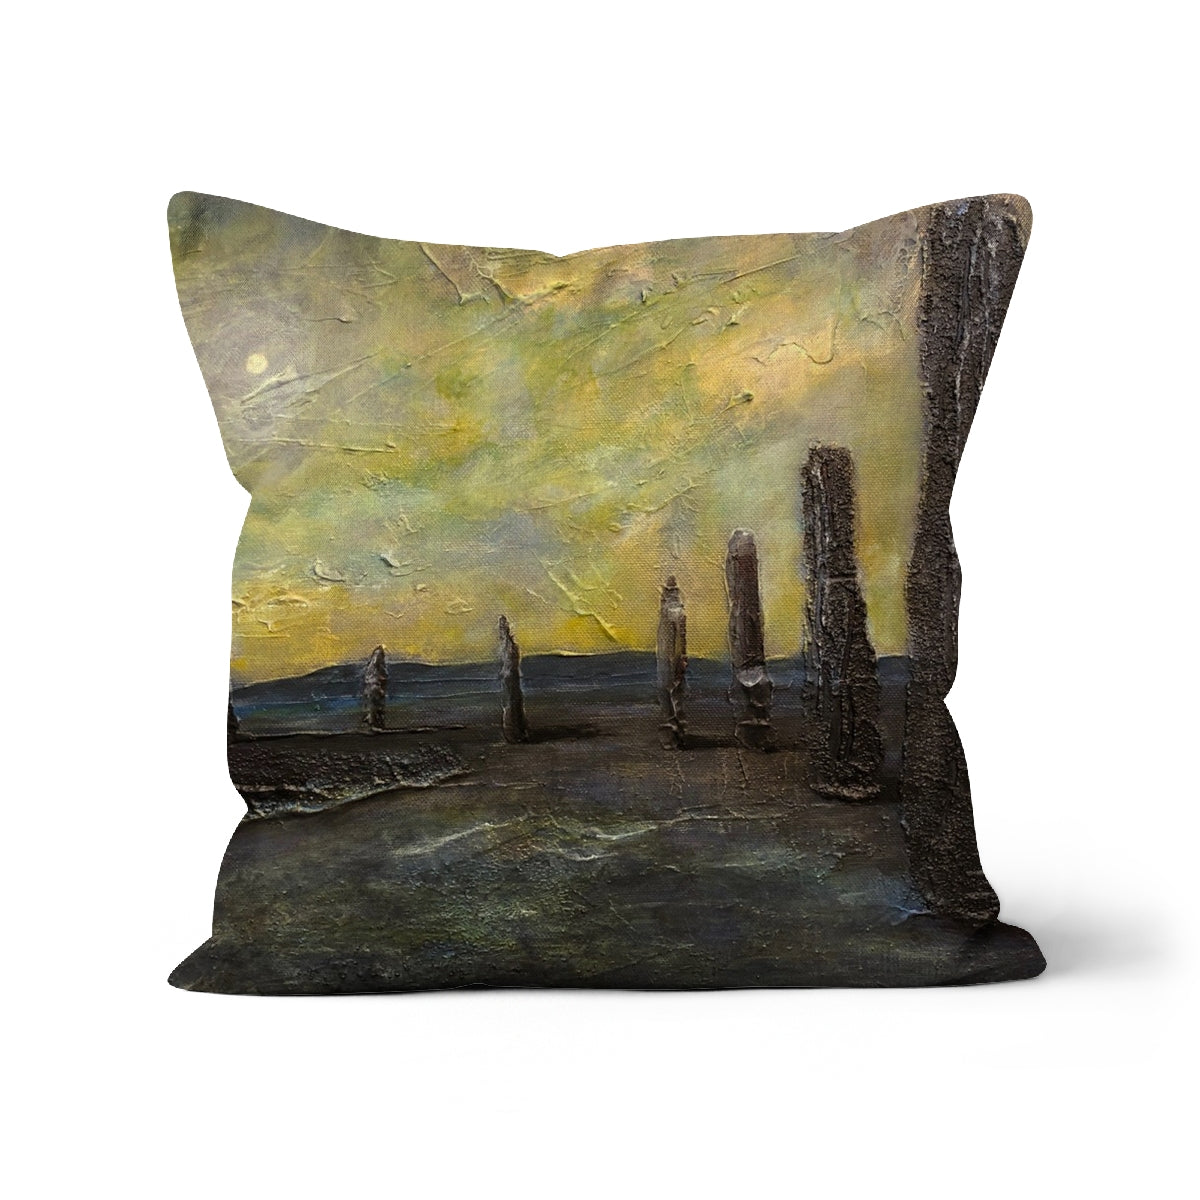 An Ethereal Ring Of Brodgar Art Gifts Cushion-Cushions-Orkney Art Gallery-Faux Suede-22"x22"-Paintings, Prints, Homeware, Art Gifts From Scotland By Scottish Artist Kevin Hunter